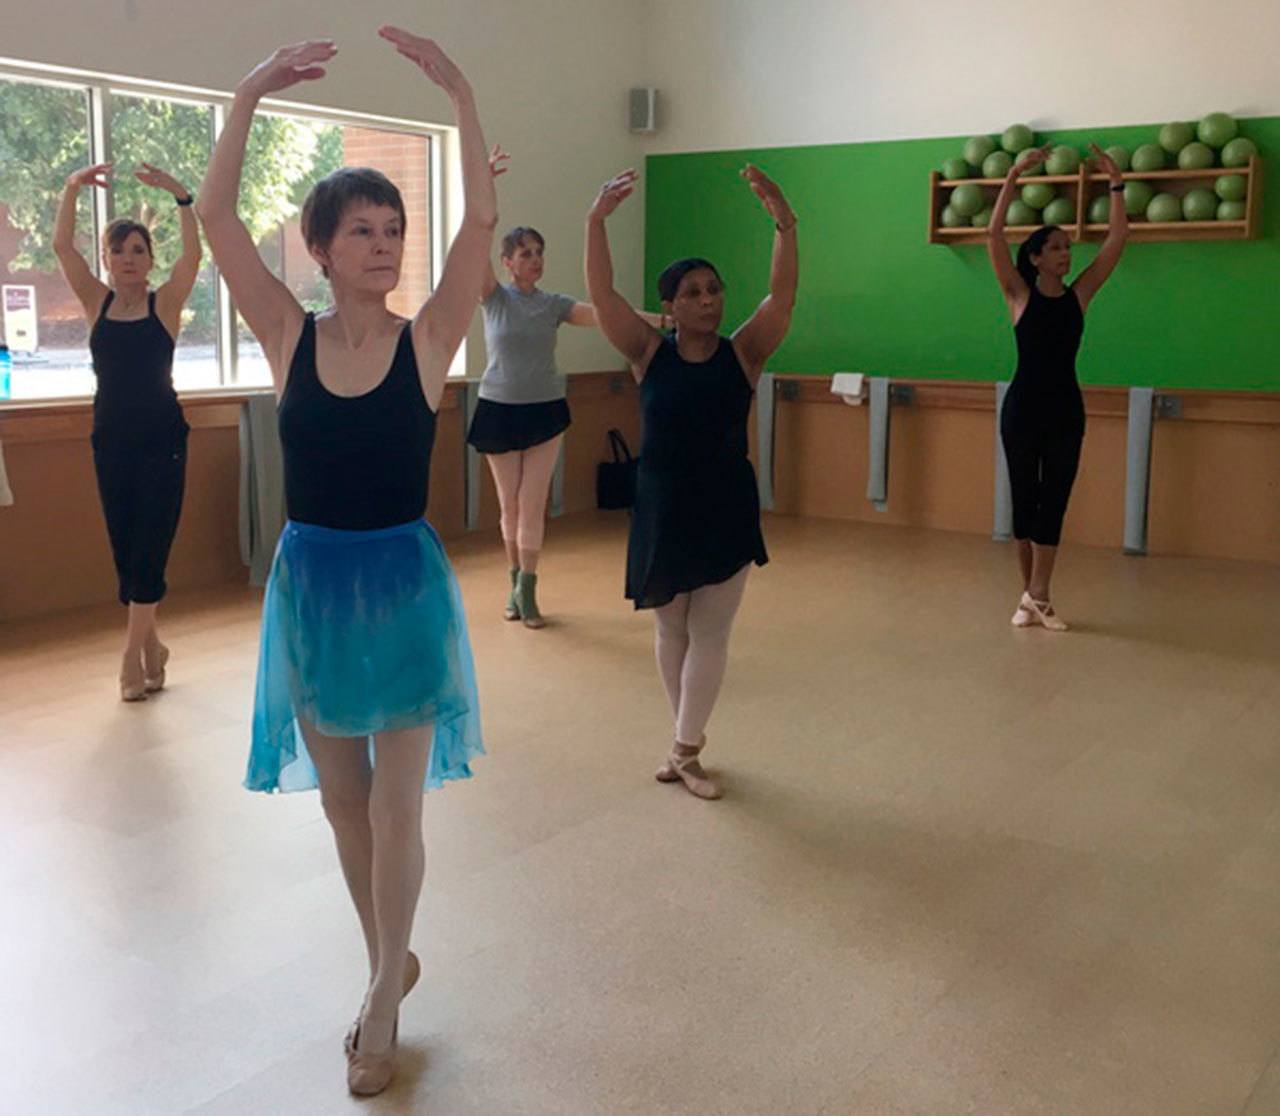 “Ballet with Stevie” classes for adults are held at The Dailey Method in Mercer Island. Photo courtesy of Stevie Reiff